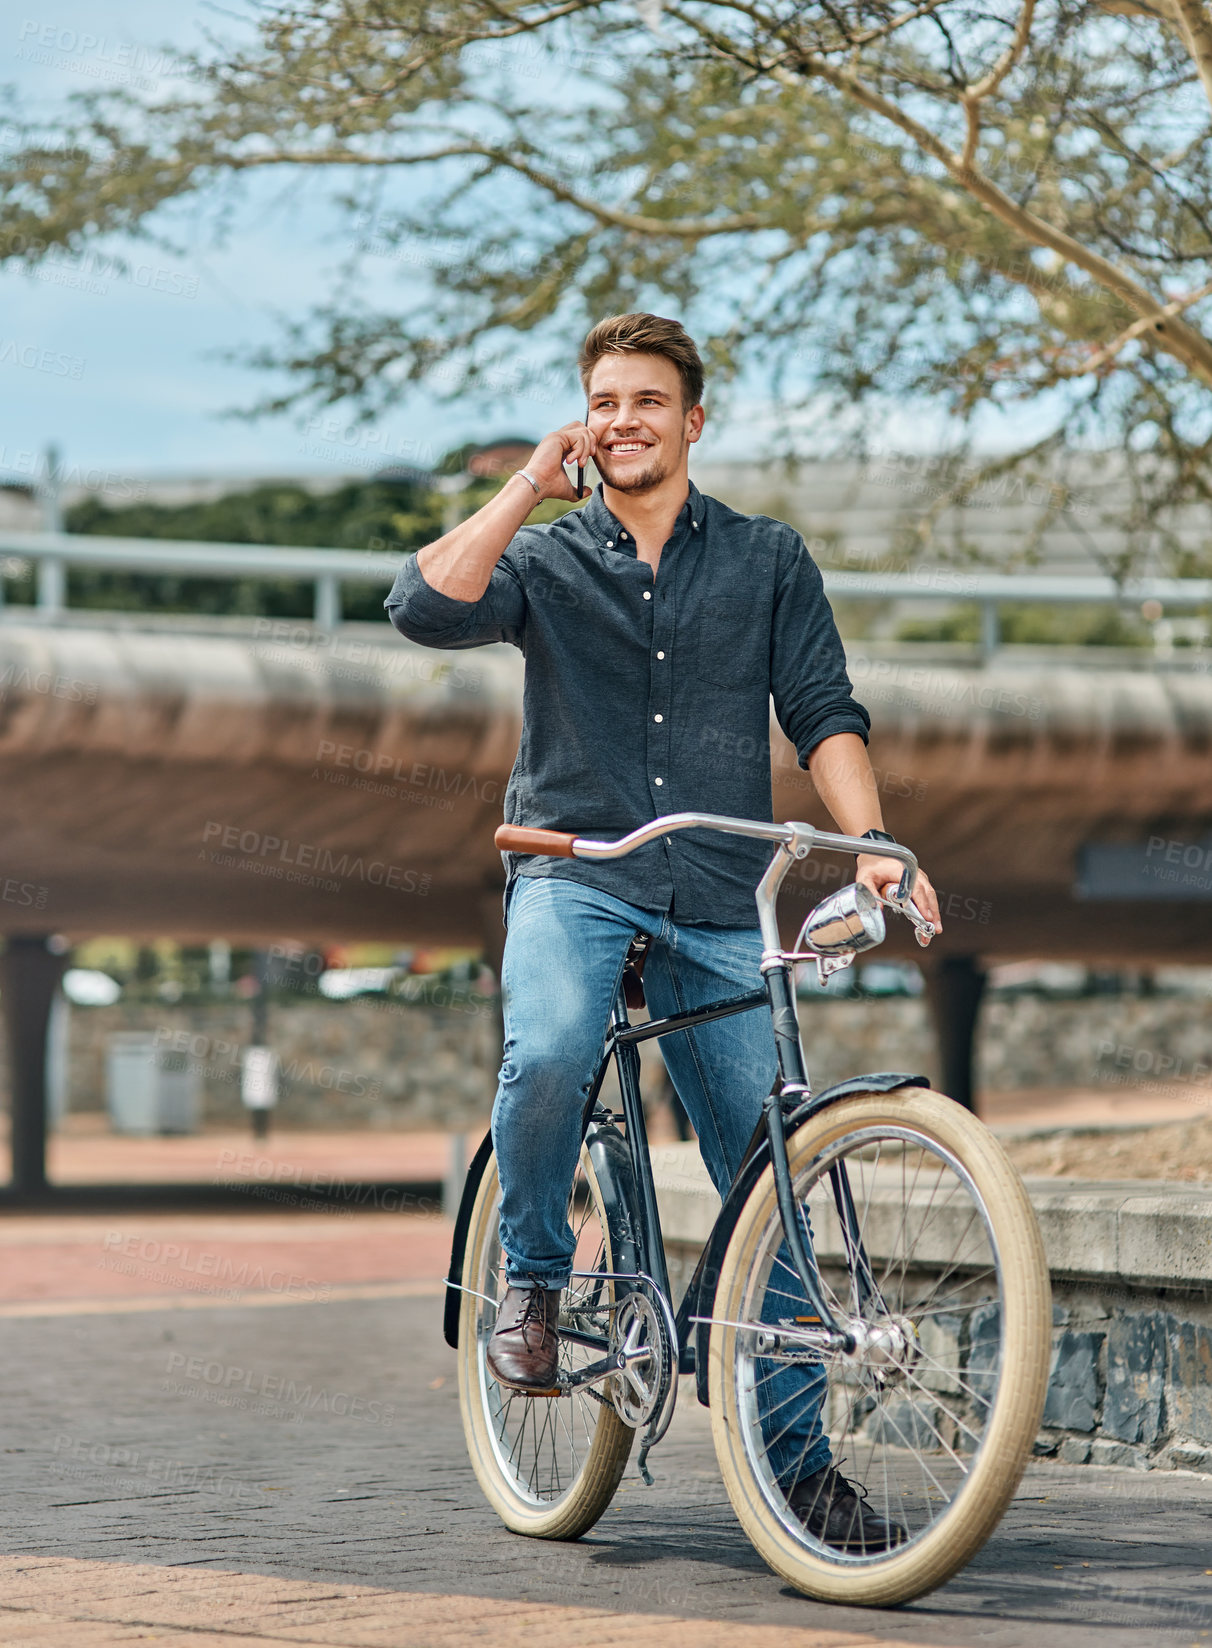 Buy stock photo Shot of a young male student using his mobile phone while cycling on campus